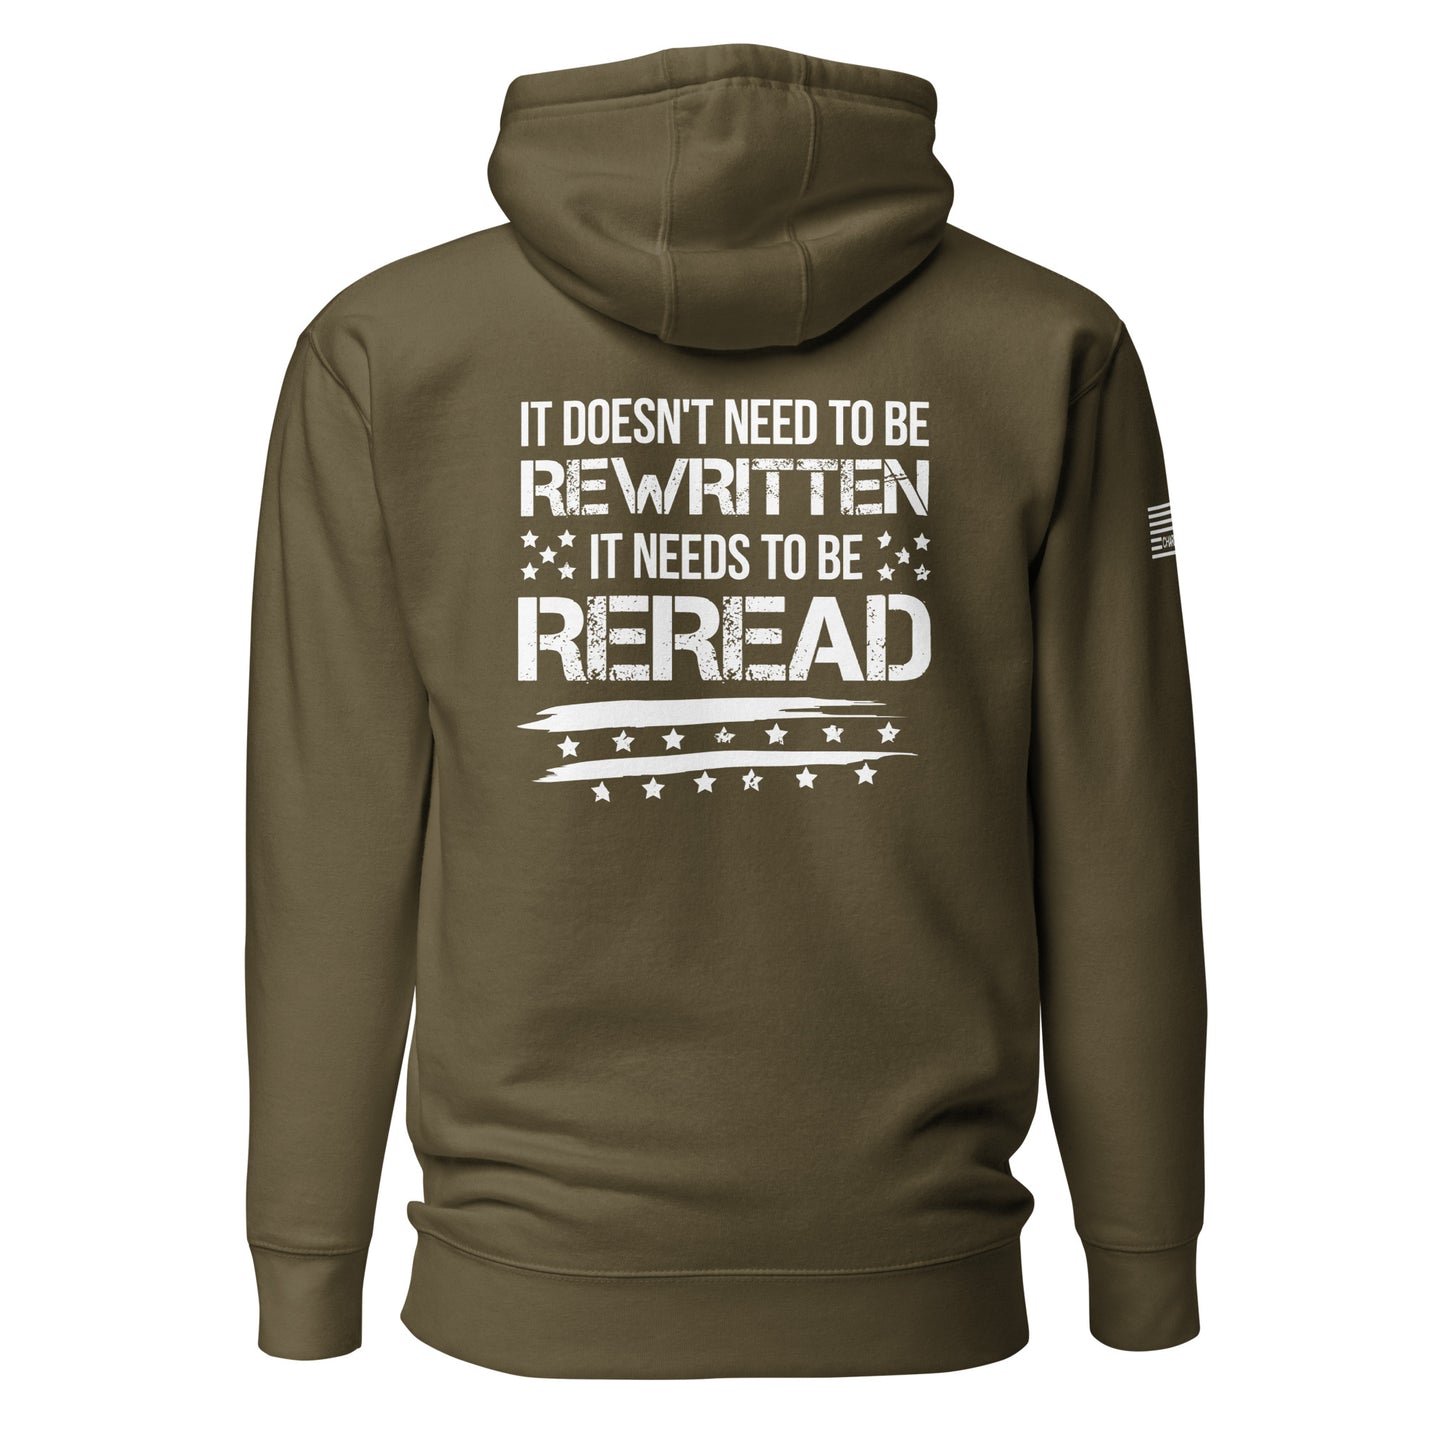 It Doesn't Need To Be Rewritten It Needs To Be Reread Unisex Hoodie